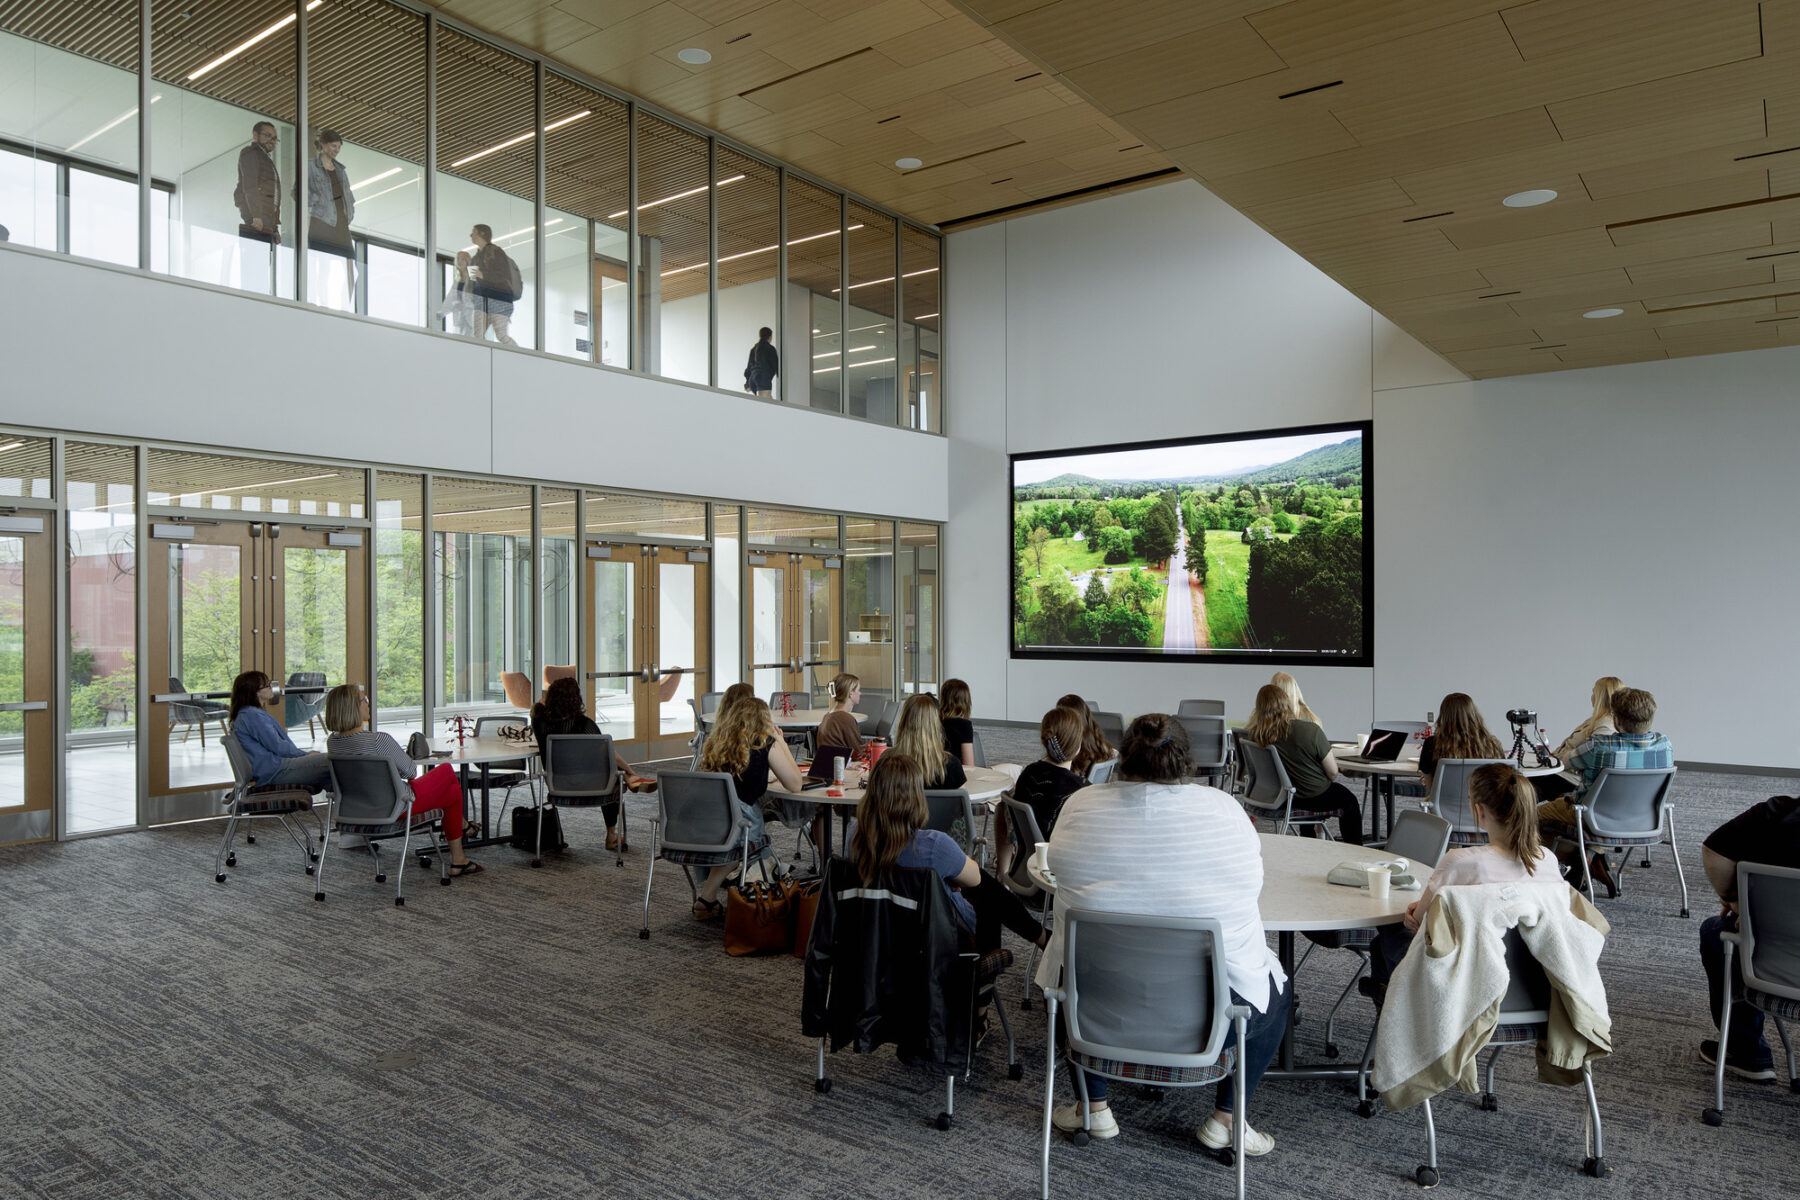 Photo of class presentations in an open, conference room space with large TV screen and windows with faculty and students looking in from the glass windows on the bridge above